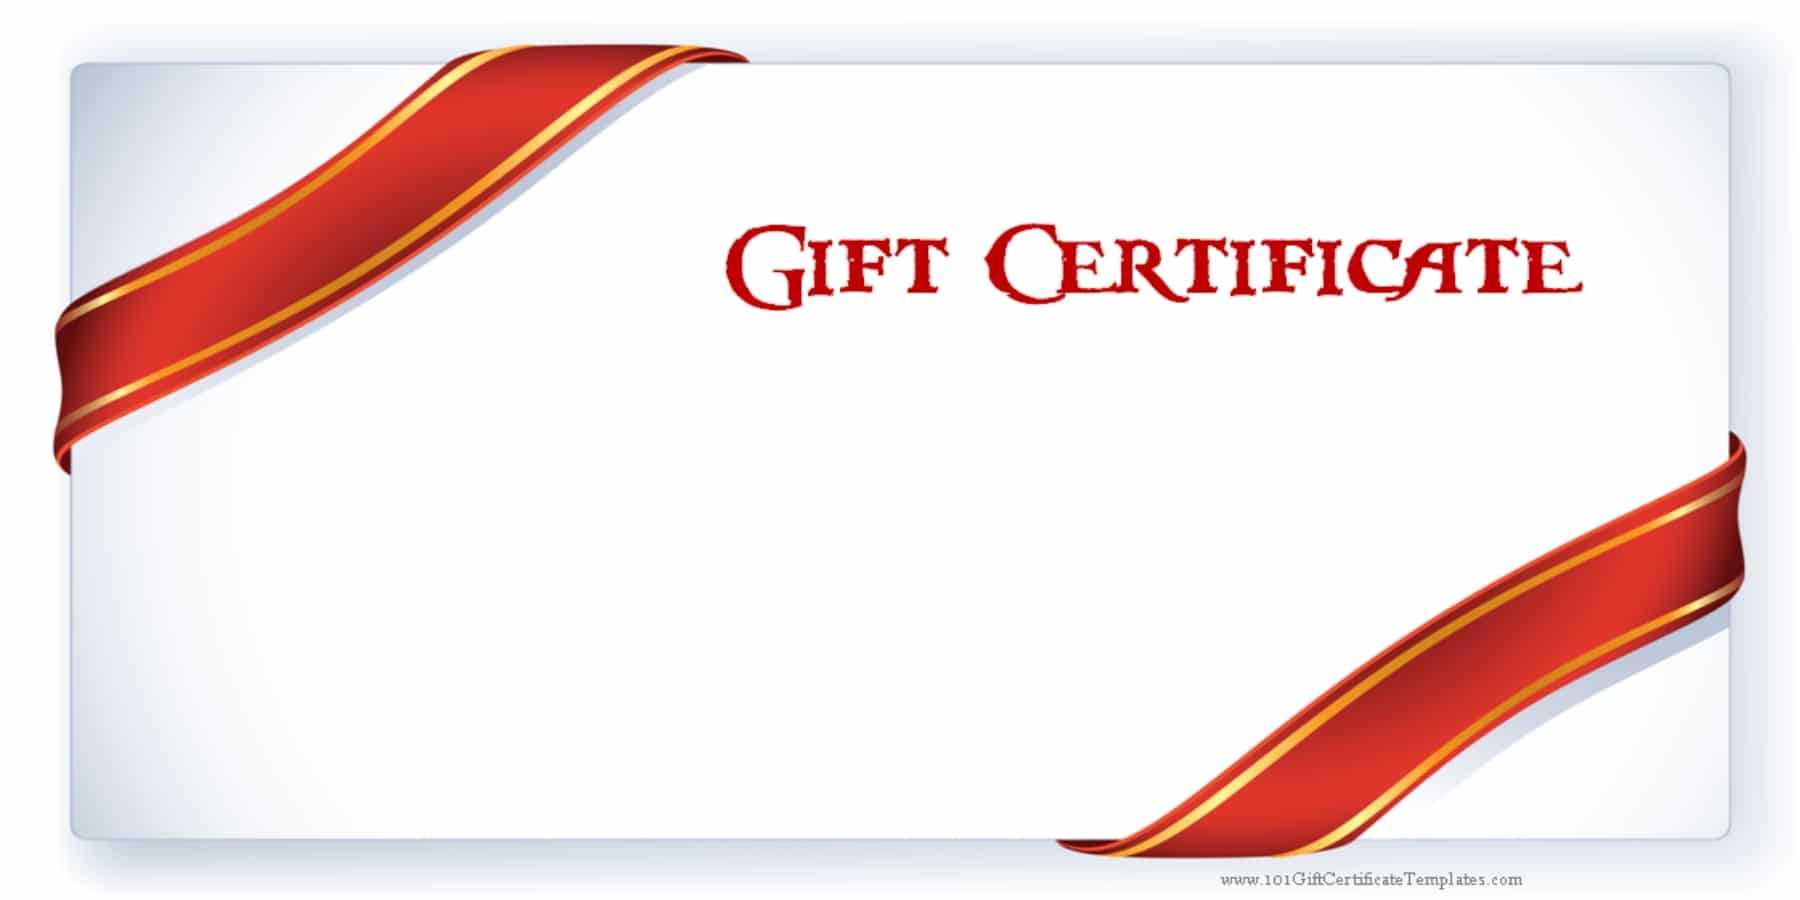 Printable Gift Certificate Templates Intended For Graduation Gift Certificate Template Free